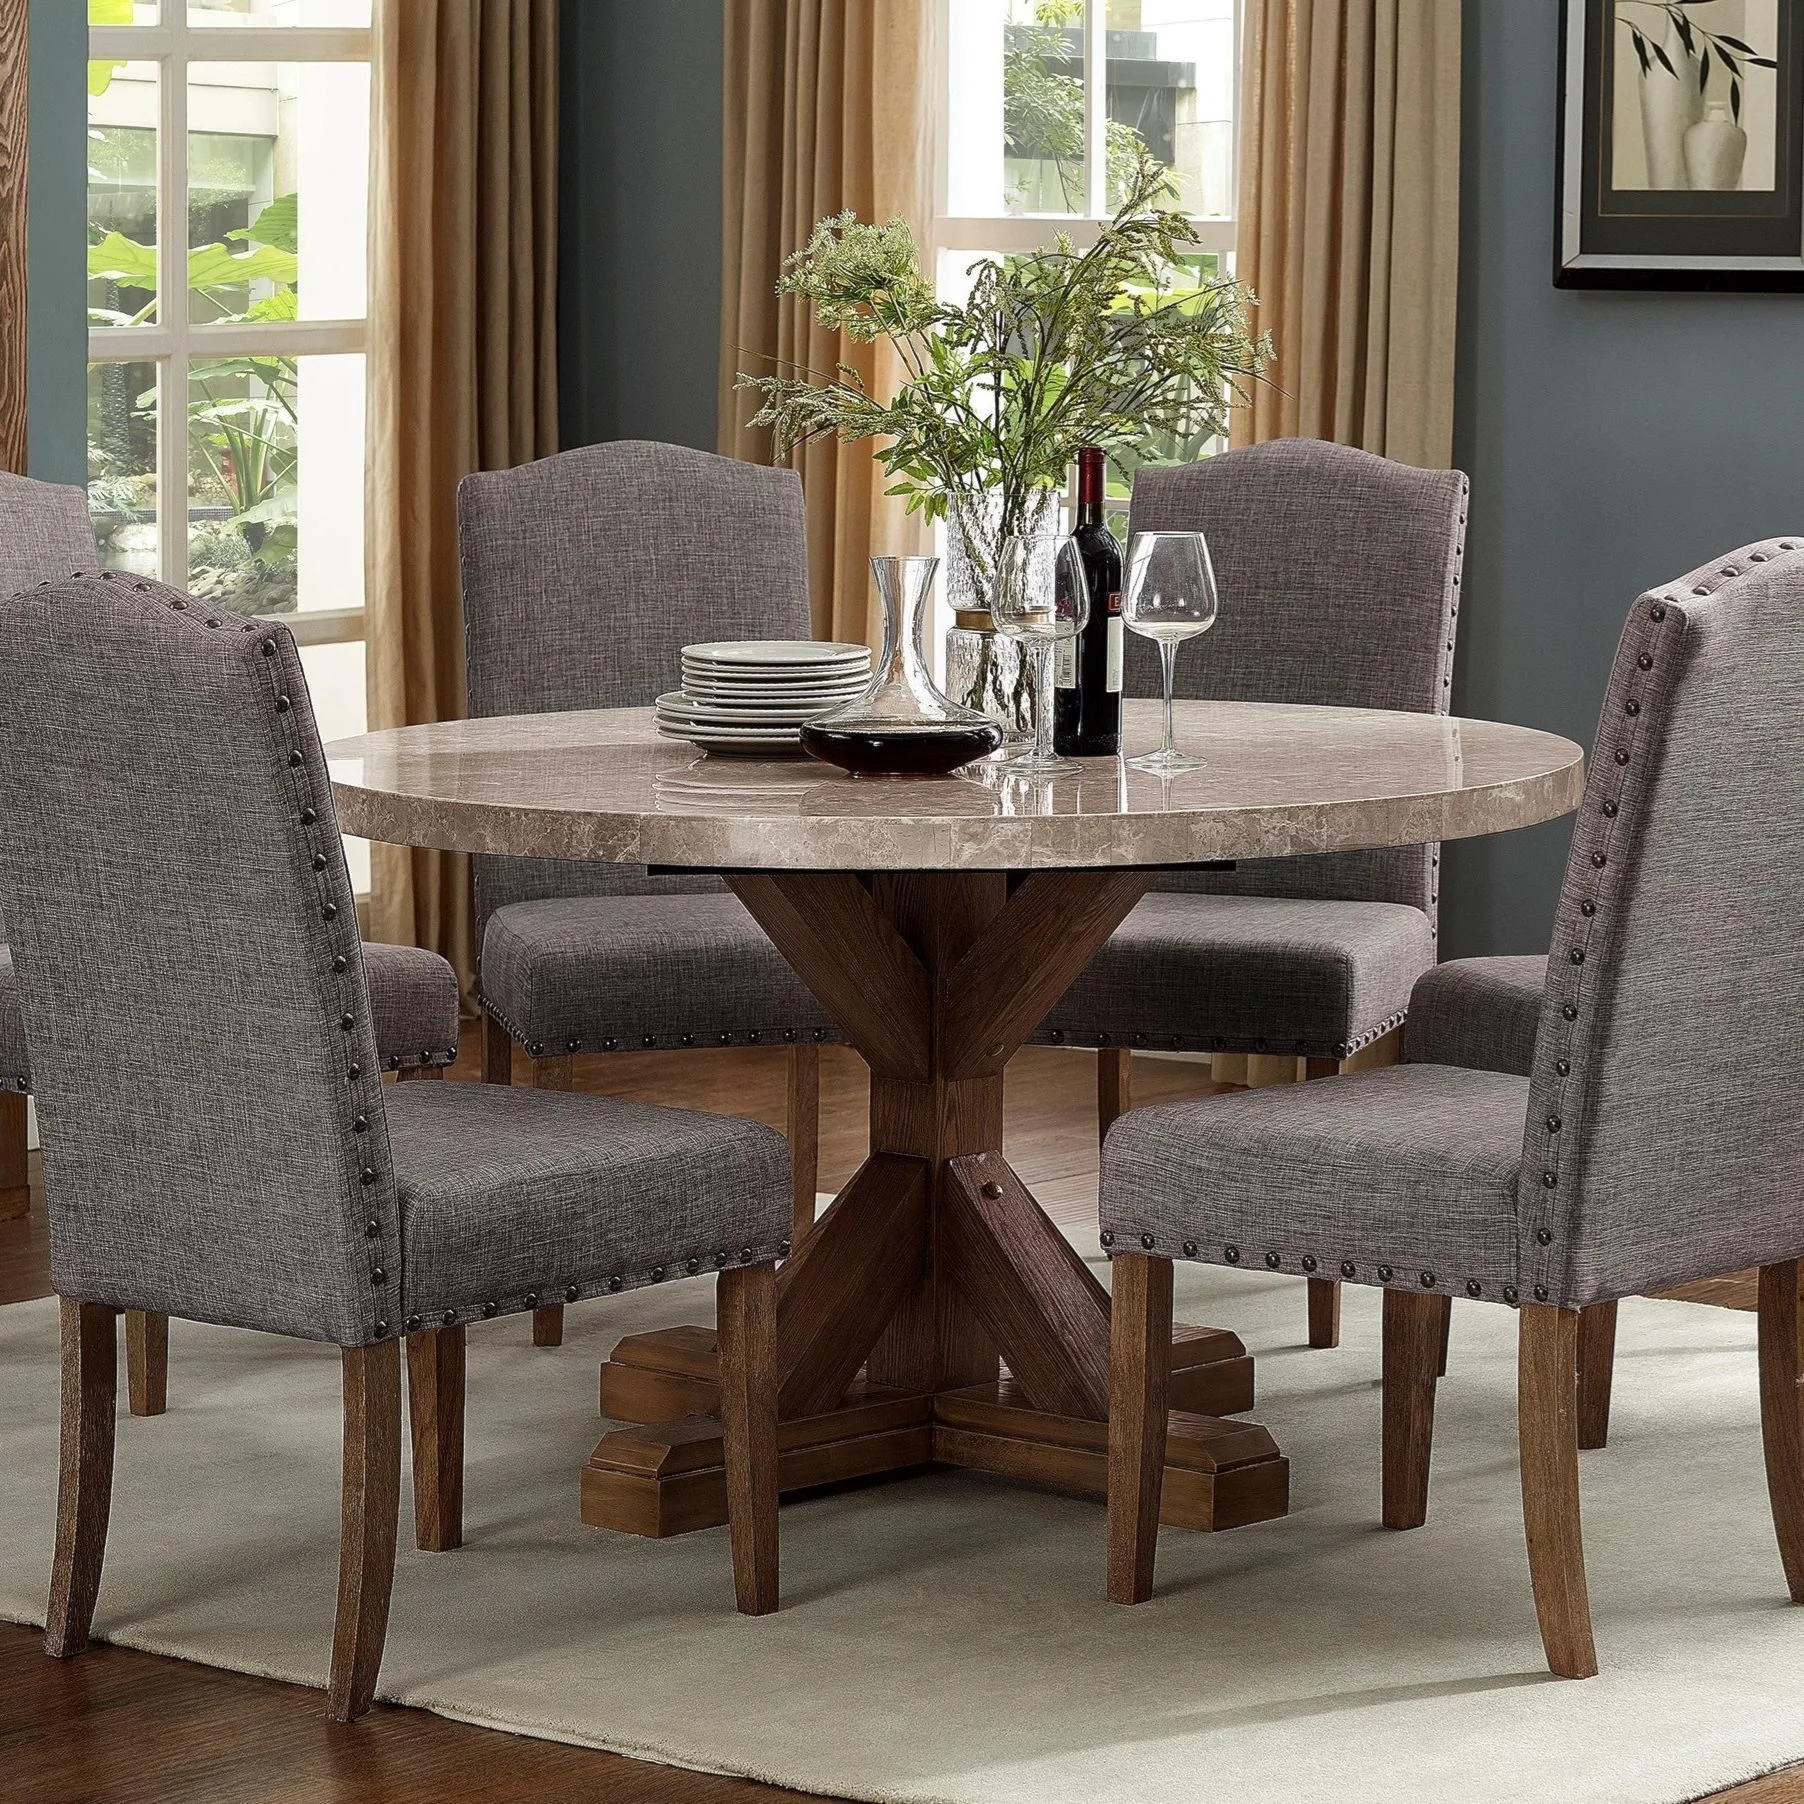 Crown Mark Vesper Dining 1211T-54-BASEx1+1211T-54-TOPx1 Round Dining ...